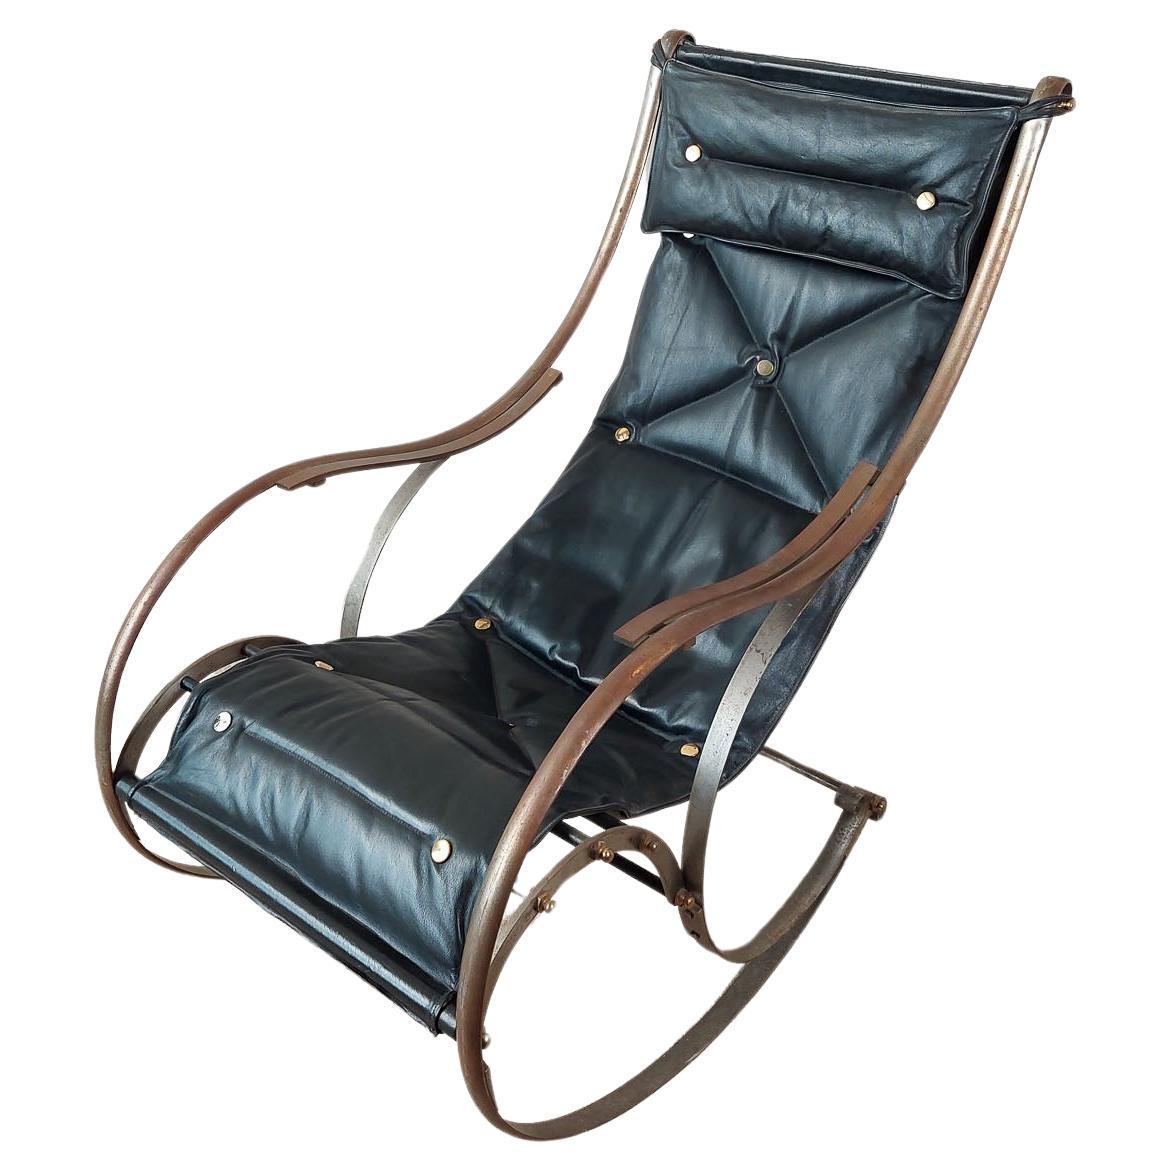 Antique leather and iron rocking chair by P. Cooper for R.W. Winfield, ca. 1850 For Sale